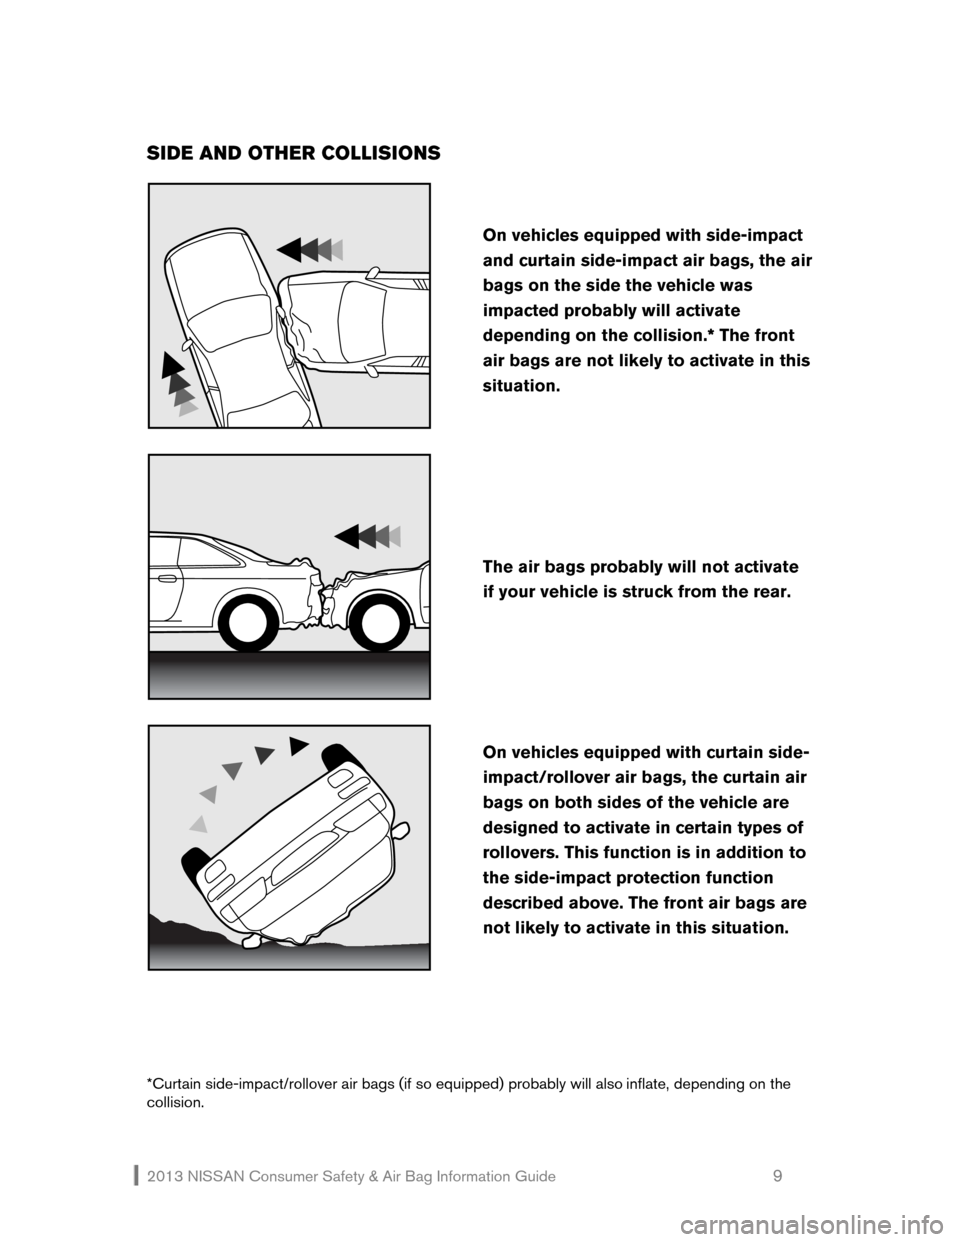 NISSAN FRONTIER 2013 D40 / 2.G Consumer Safety Air Bag Information Guide 2013 NISSAN Consumer Safety & Air Bag Information Guide                                                   9 
SIDE AND OTHER COLLISIONS 
 
 
 
 
 
*Curtain side-impact/rollover air bags (if so equipped